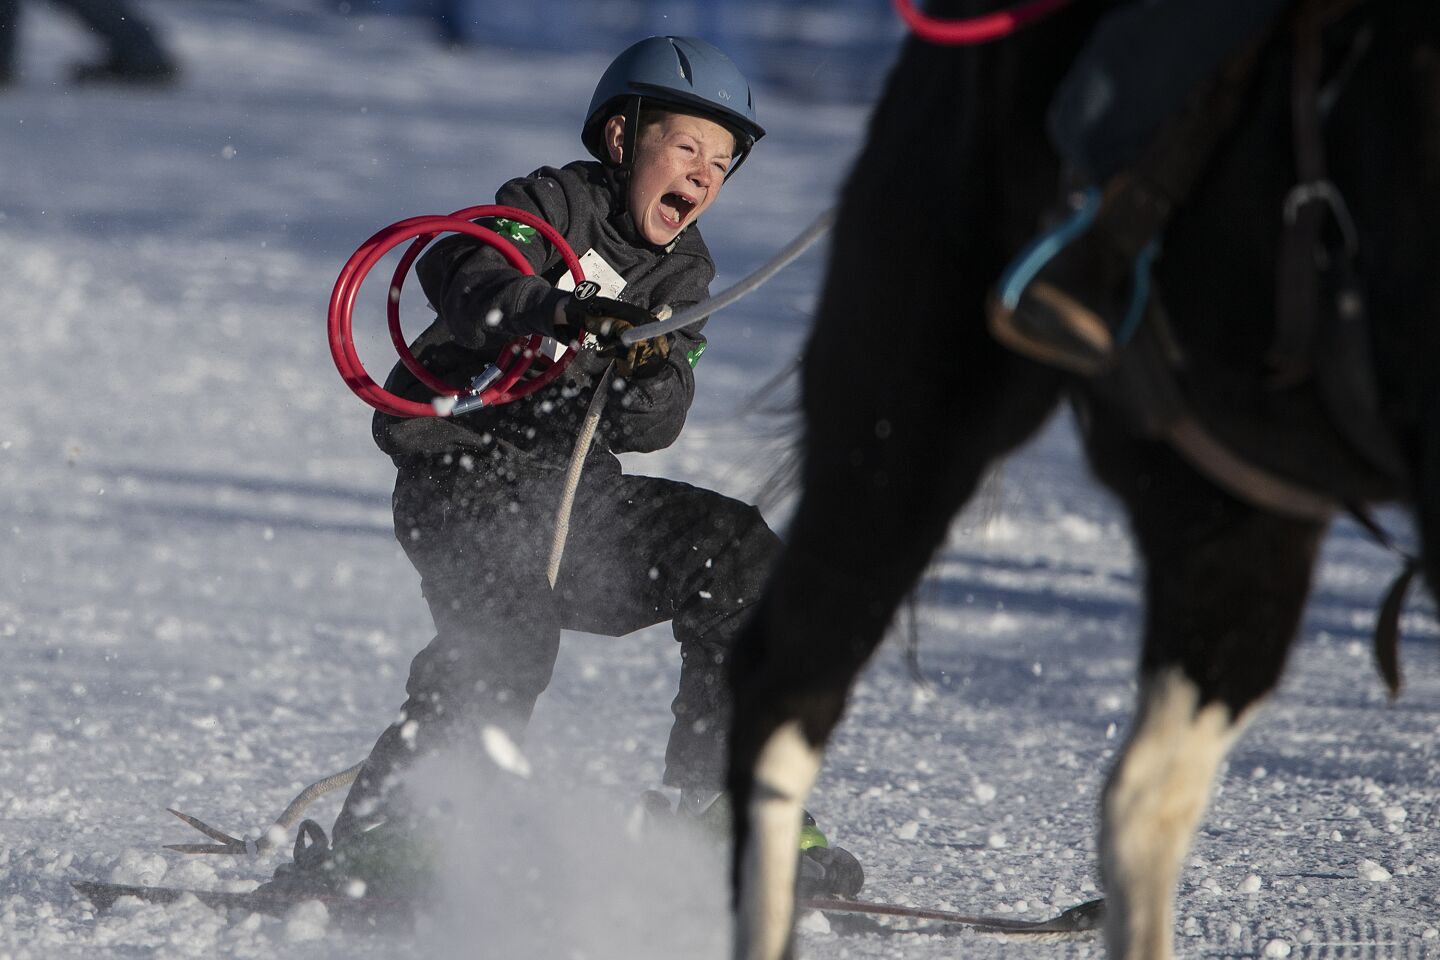 Wyatt Rasmussen, 9, screams out in elation as he nears the finish in his first every try in the Sport Division of Skijoring Utah.